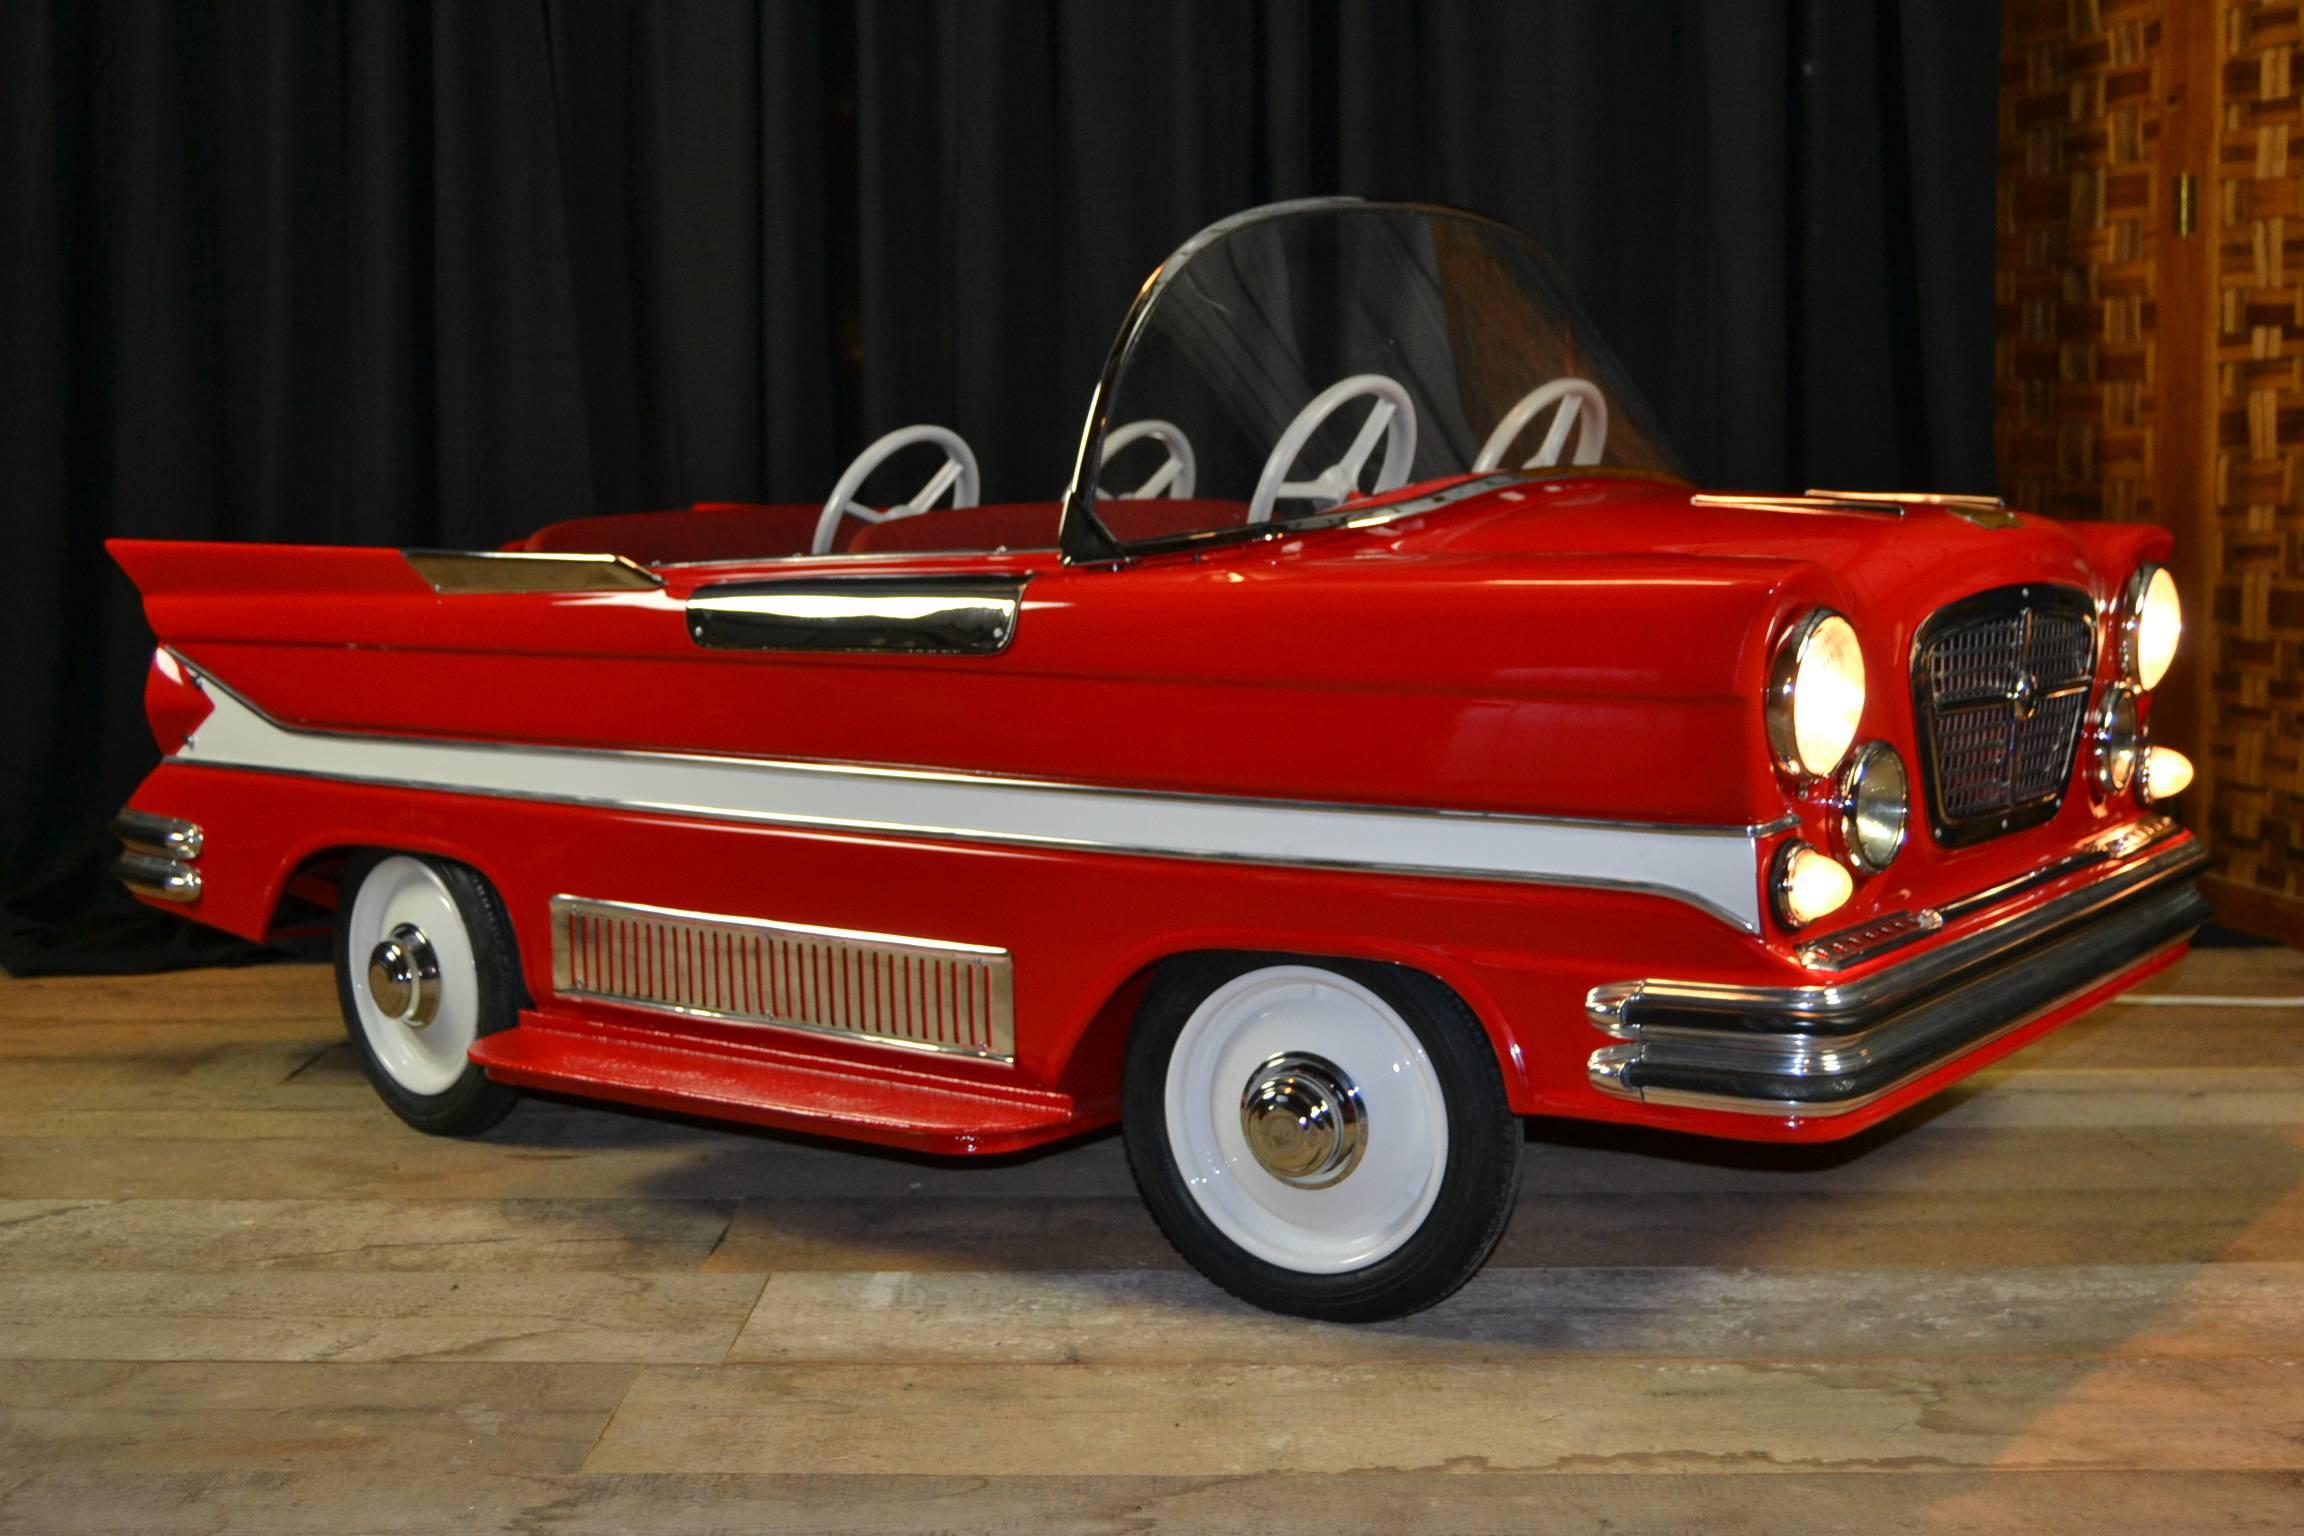 Spectacular vintage metal Carousel - Fairground Car. 
Type: Dodge.
Four-seat kid's car completely handmade for carousel.
Produced and designed in Belgium by L'Autopède from 1963-1973.
Recently fully restored. 
Awesome piece for decorating